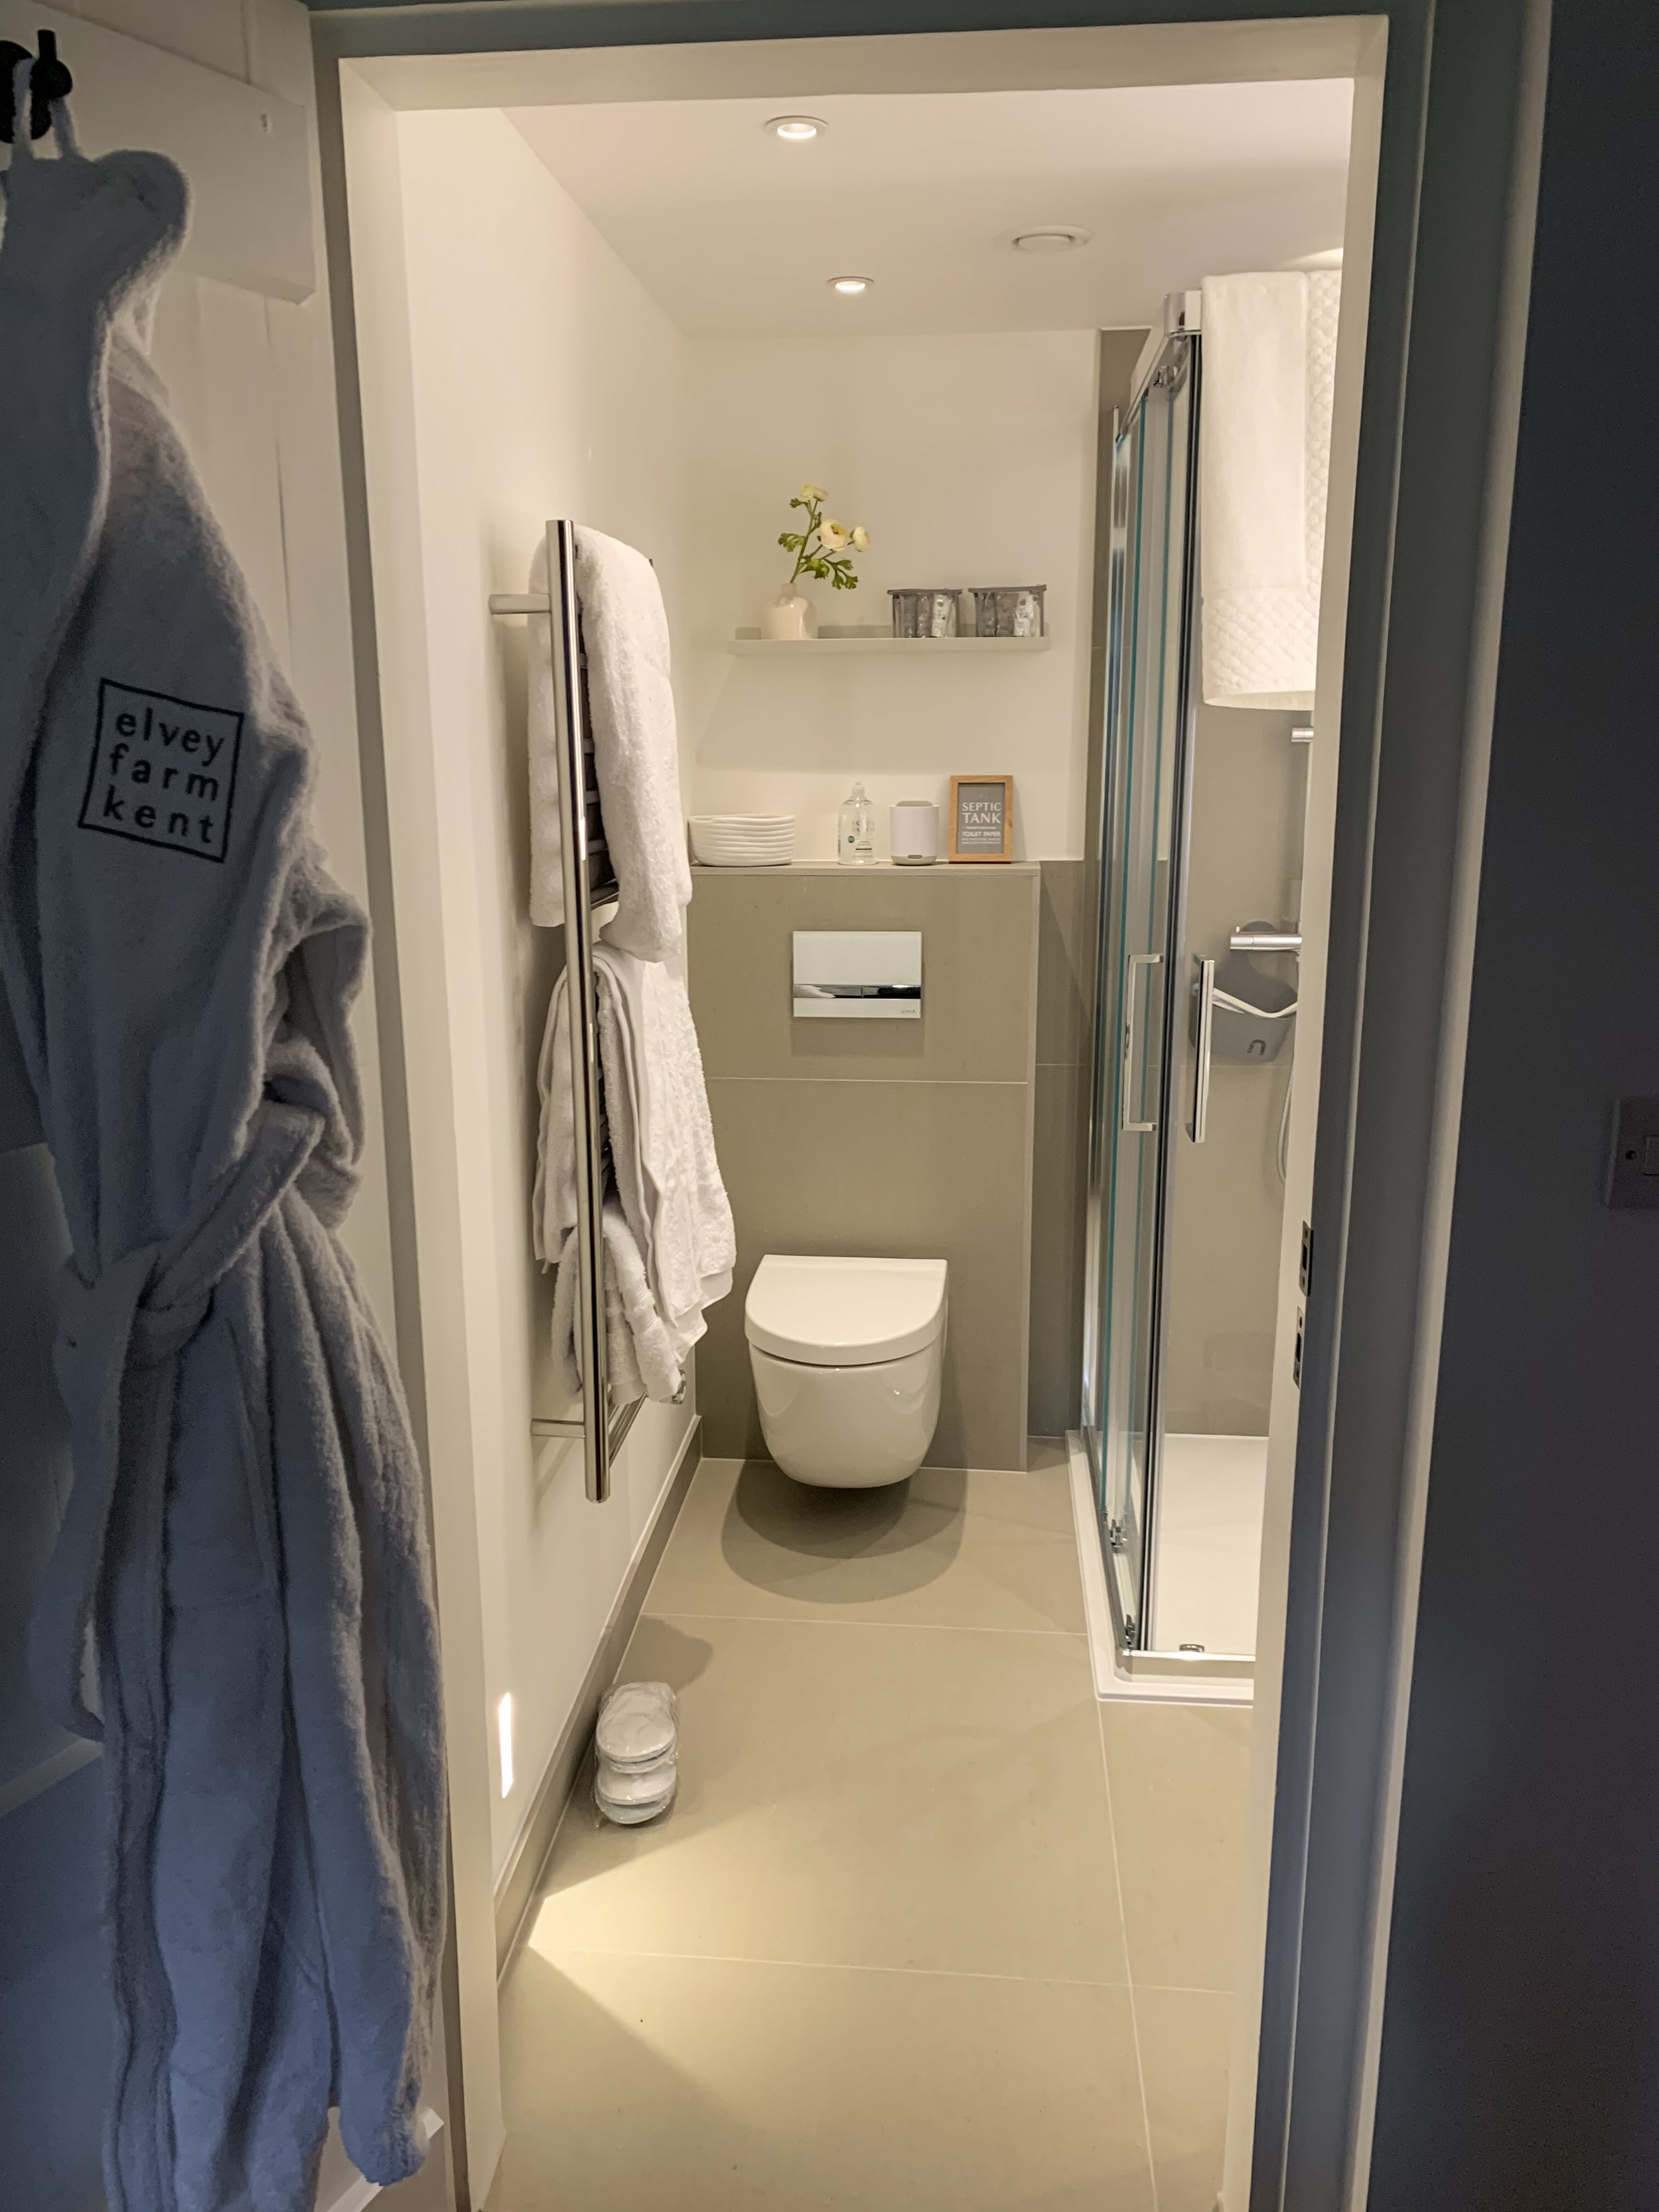 Branded robes and luxurious bathroom staples